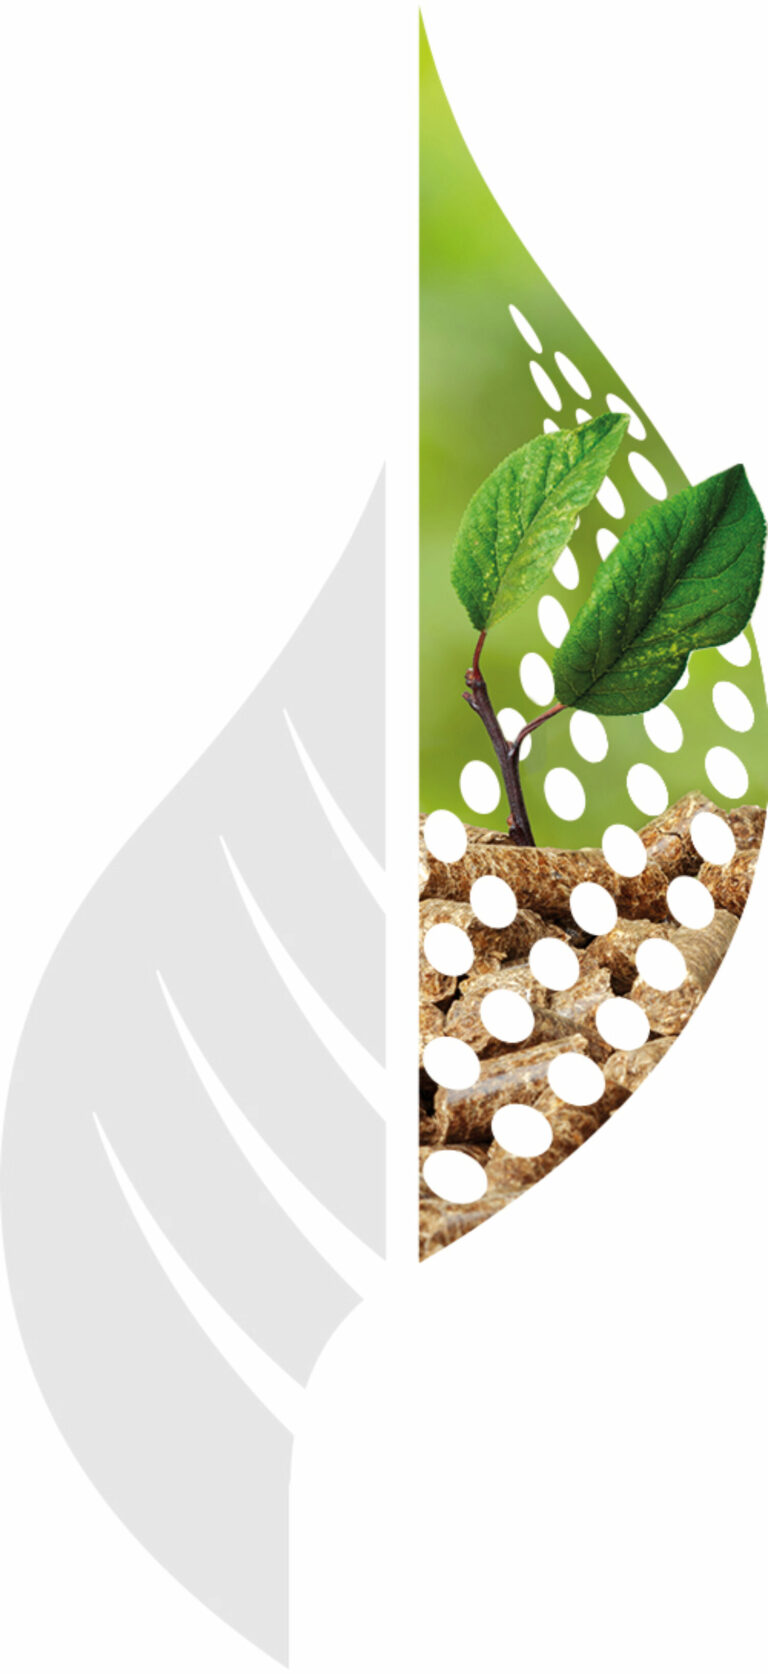 CRIBE logo with growing plant